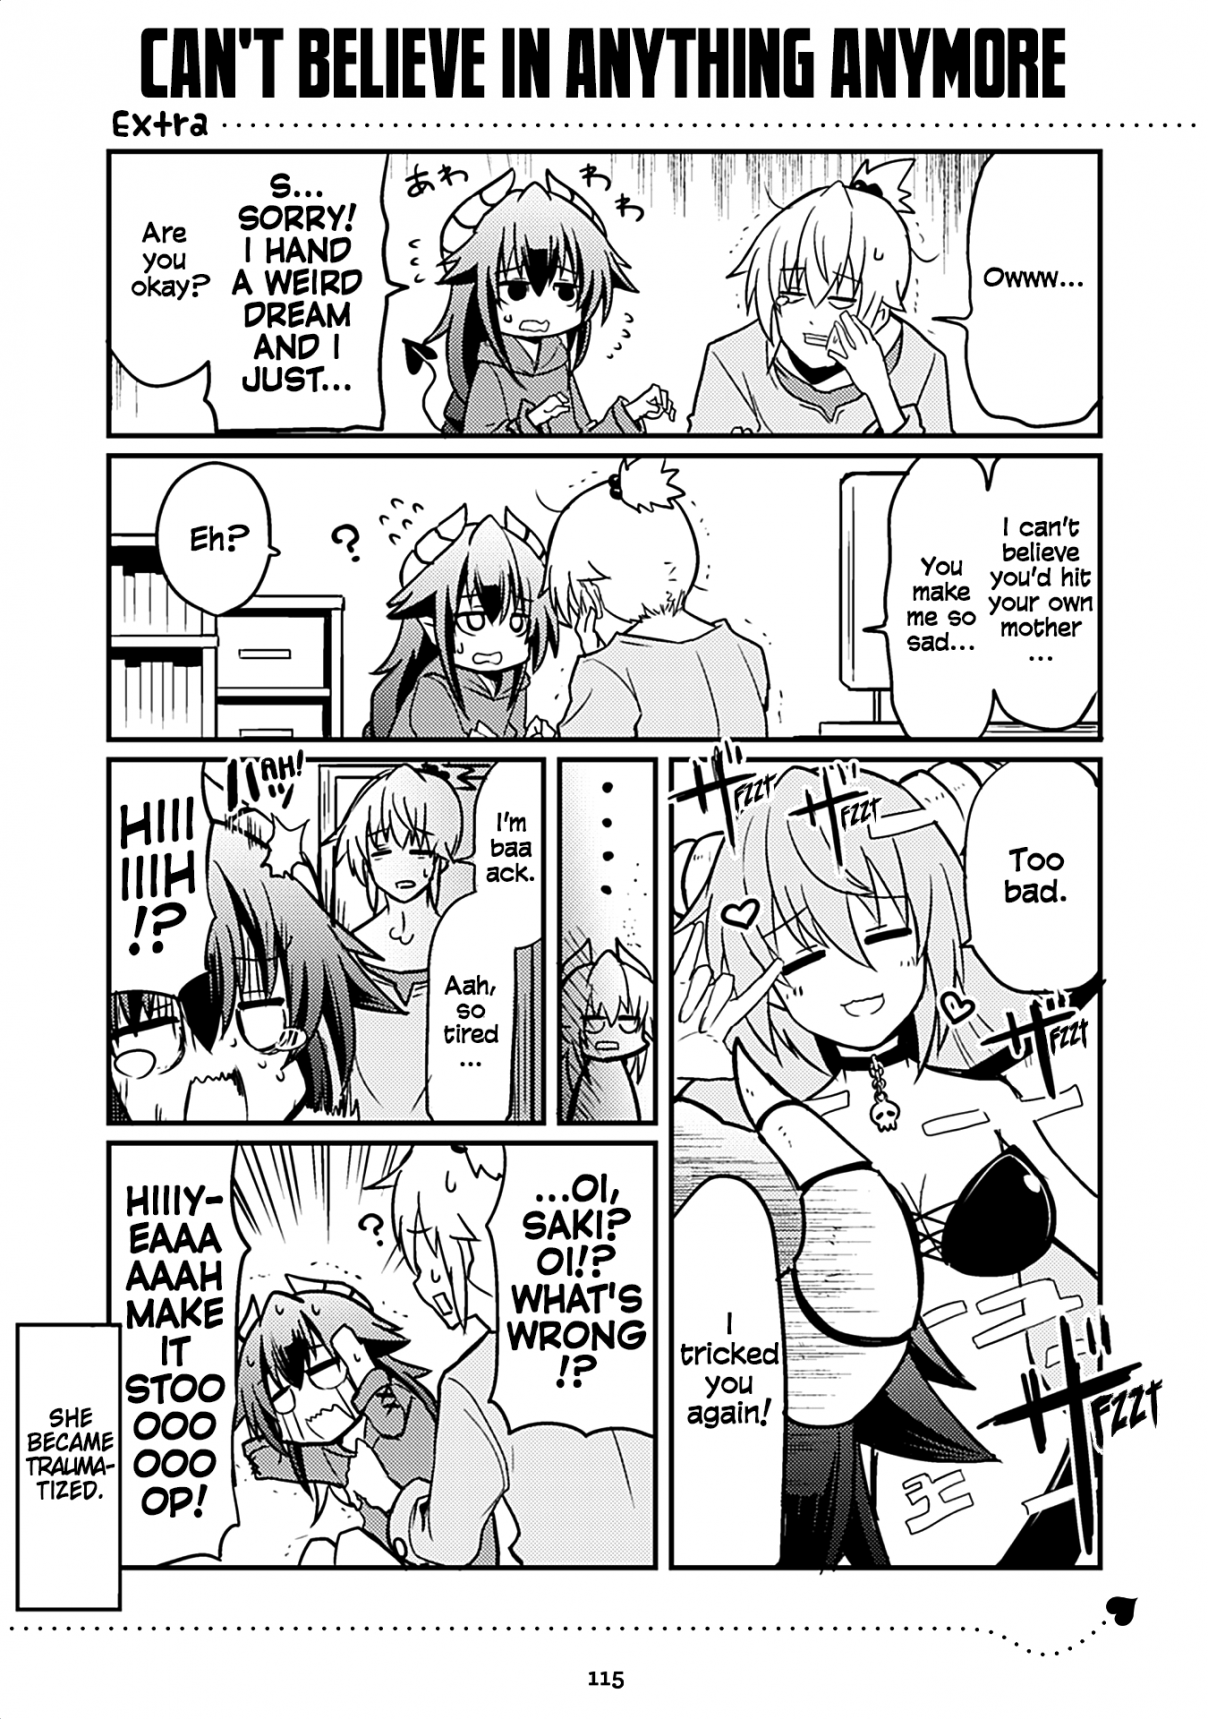 Naughty Succubus "Saki chan" Vol. 1 Ch. 98.5 Can't believe in anything anymore